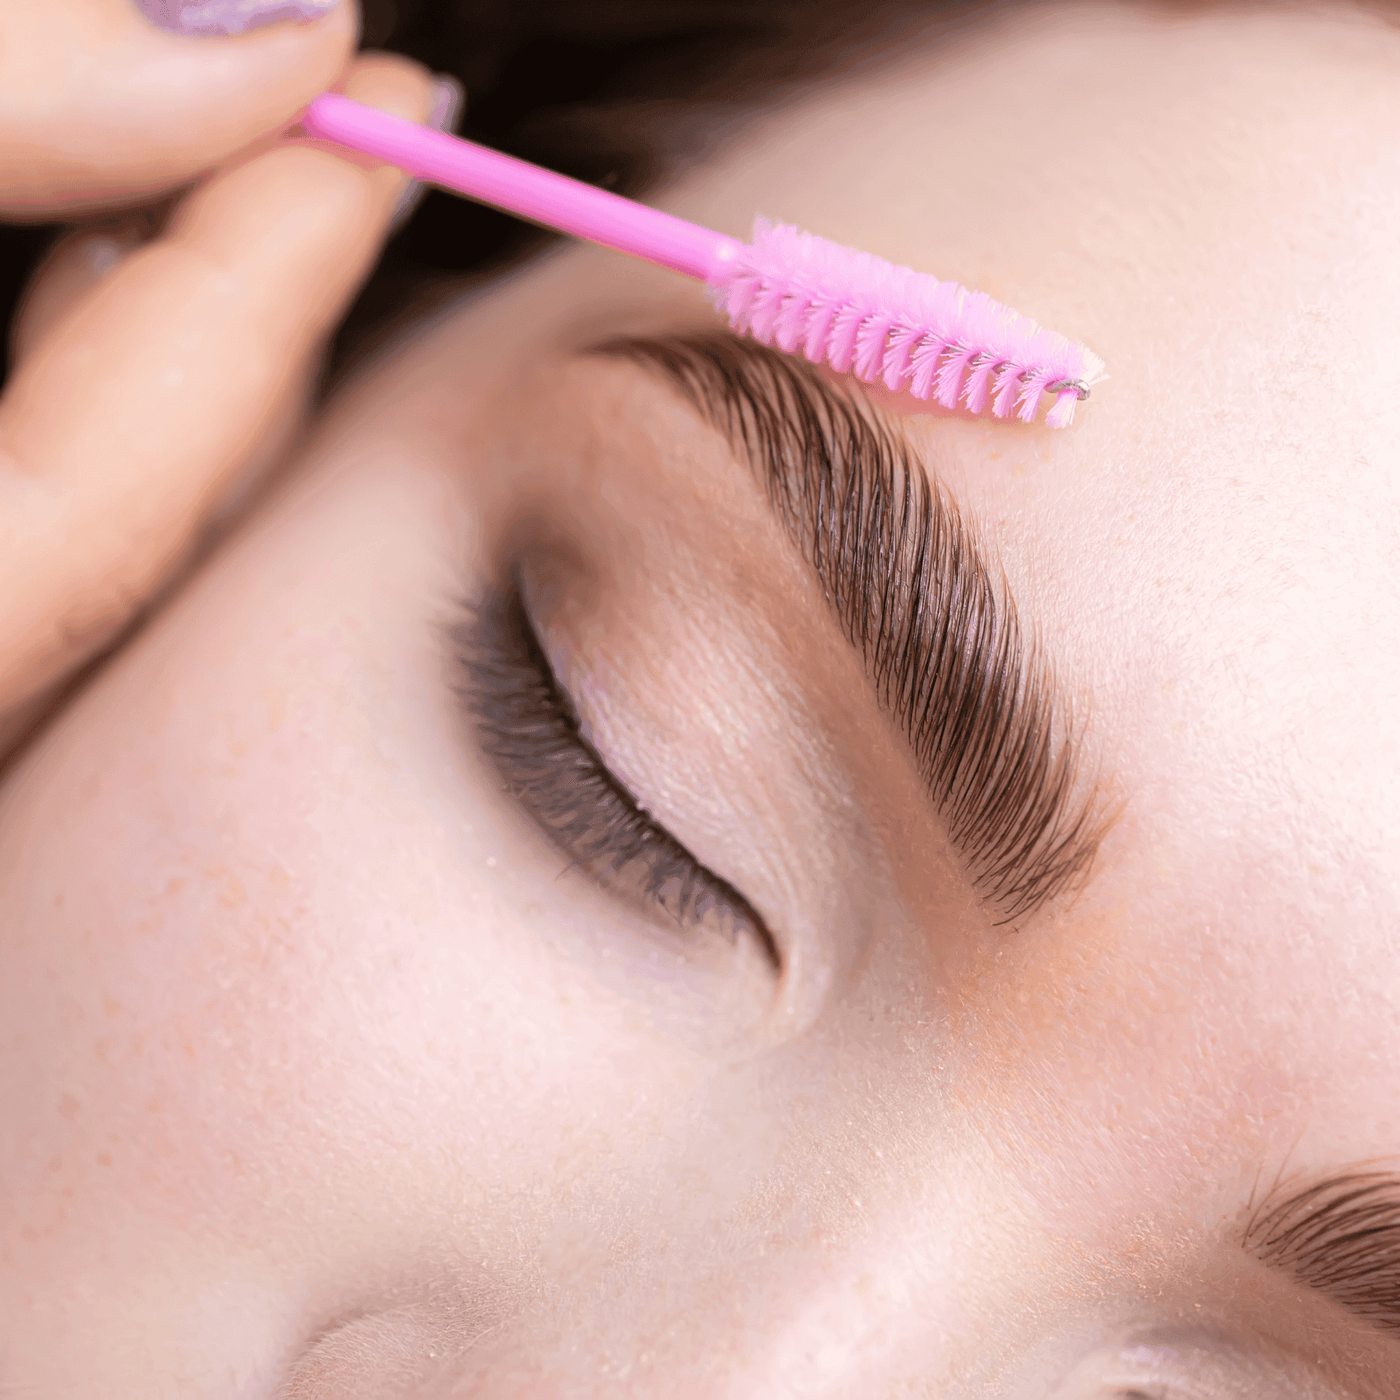 Brow Lamination Course - The London Brow Company